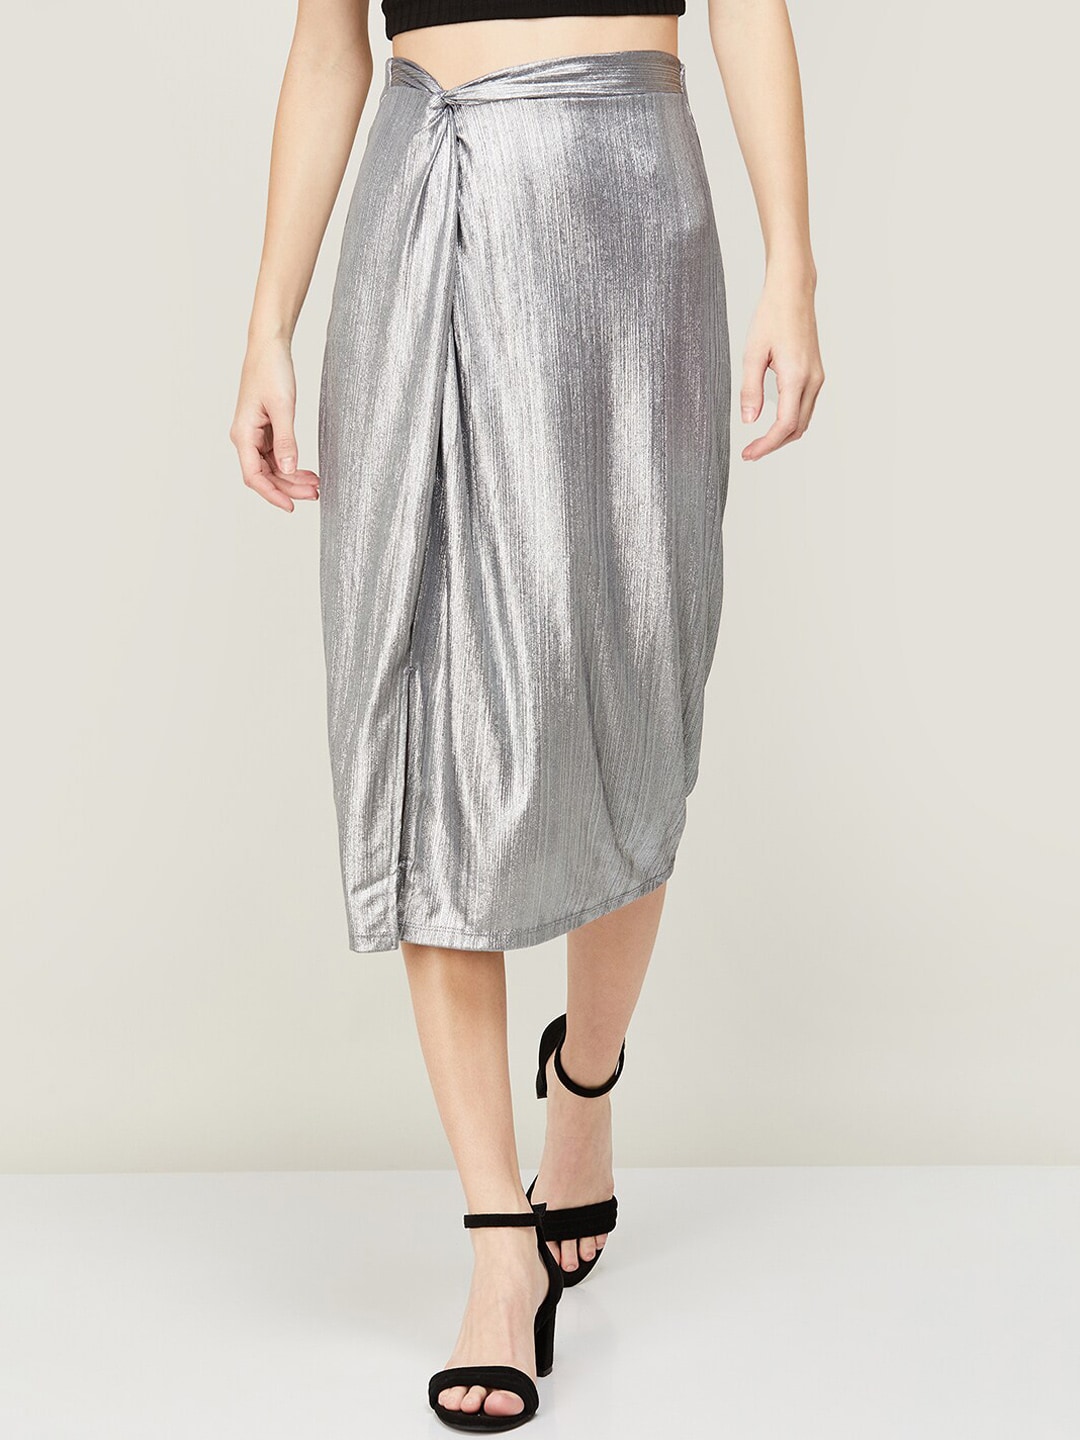 Ginger by Lifestyle Women Silver-Toned Embellished Knee-Length Pencil Skirt Price in India